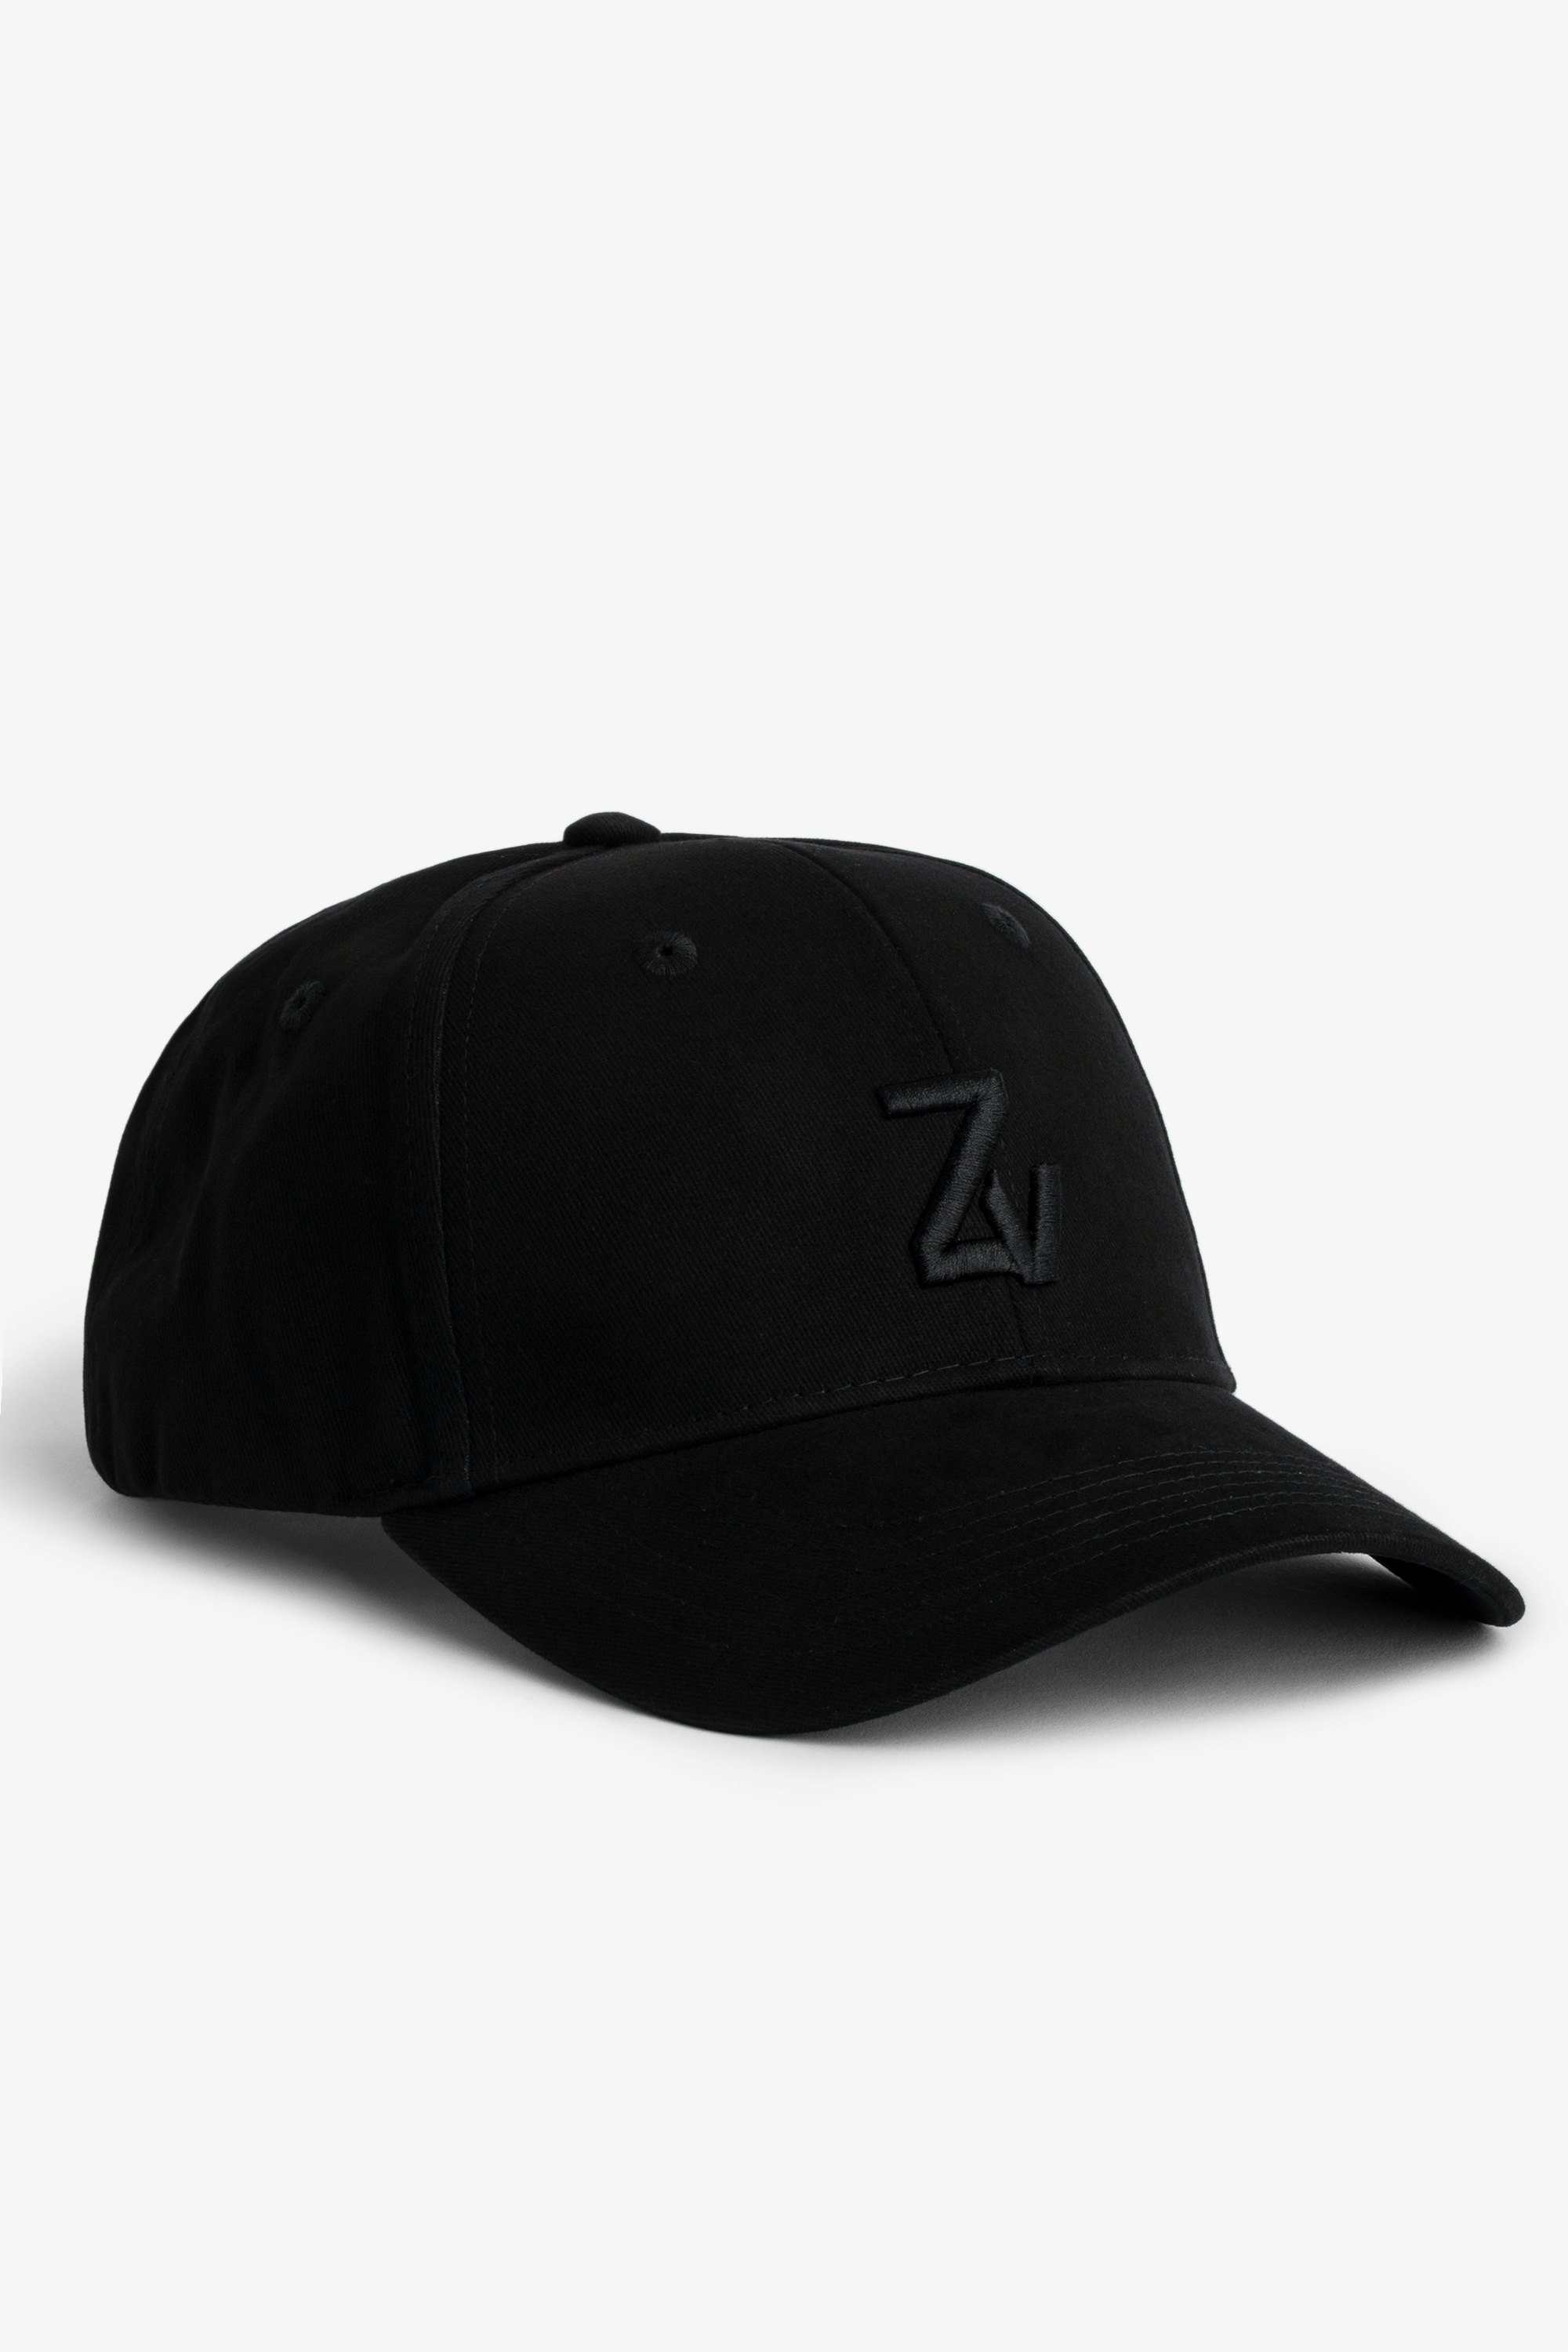 ZV Initiale Klelia Cap Cotton cap embroidered with the ZV initials.